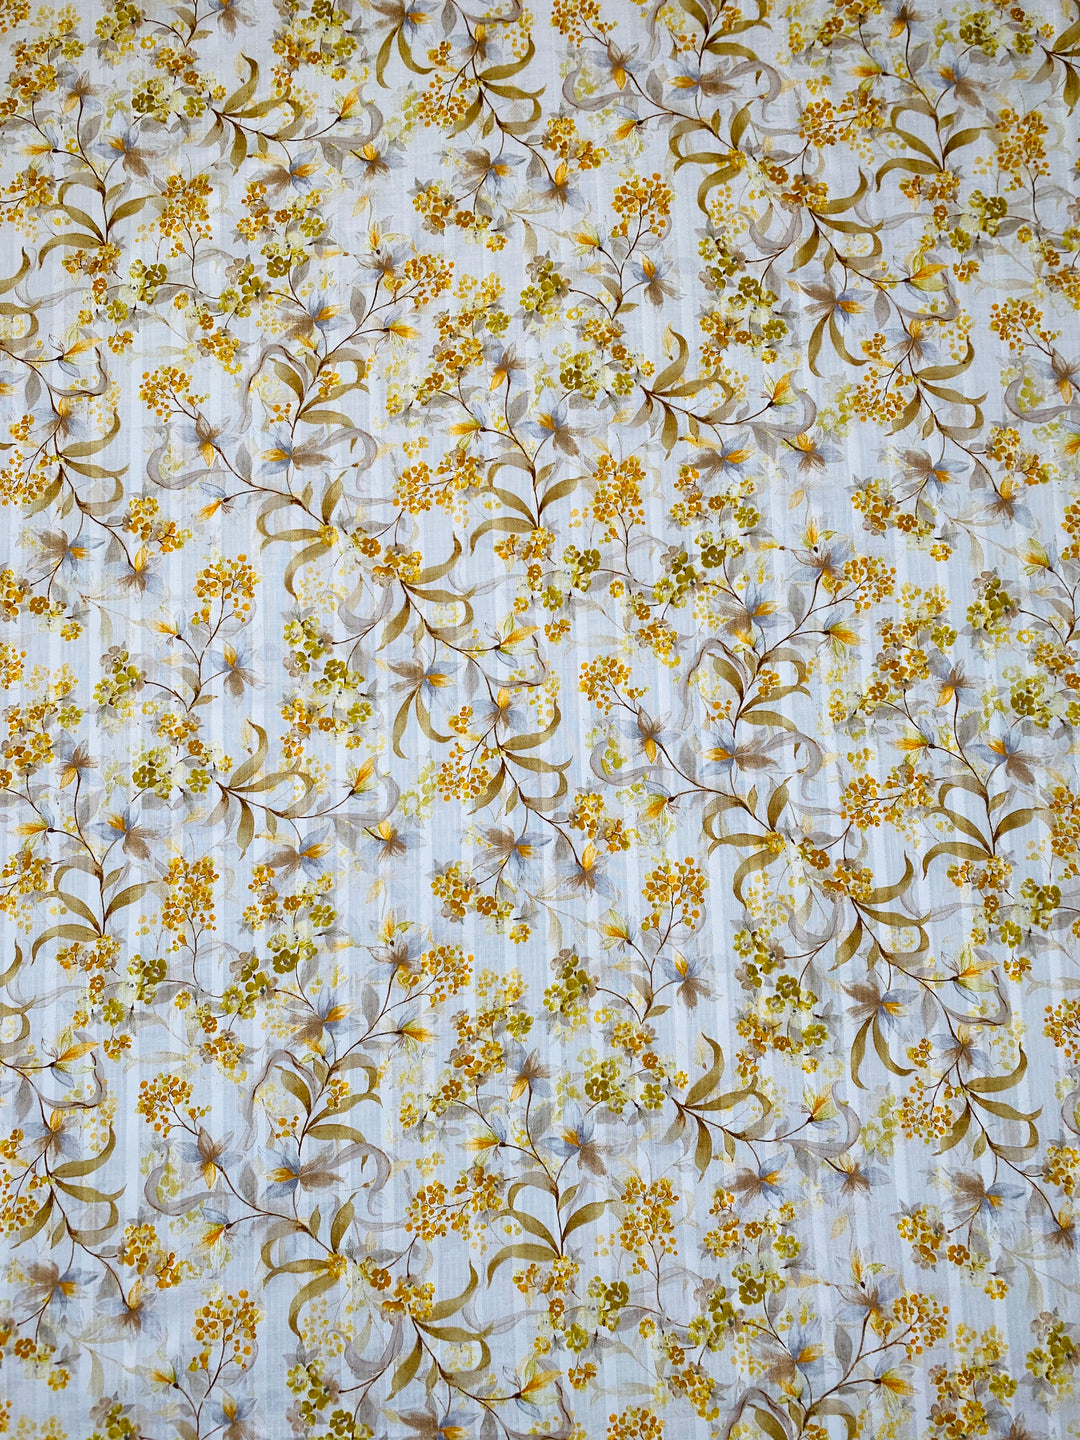 Printed Floral Cotton Fabric White/Yellow